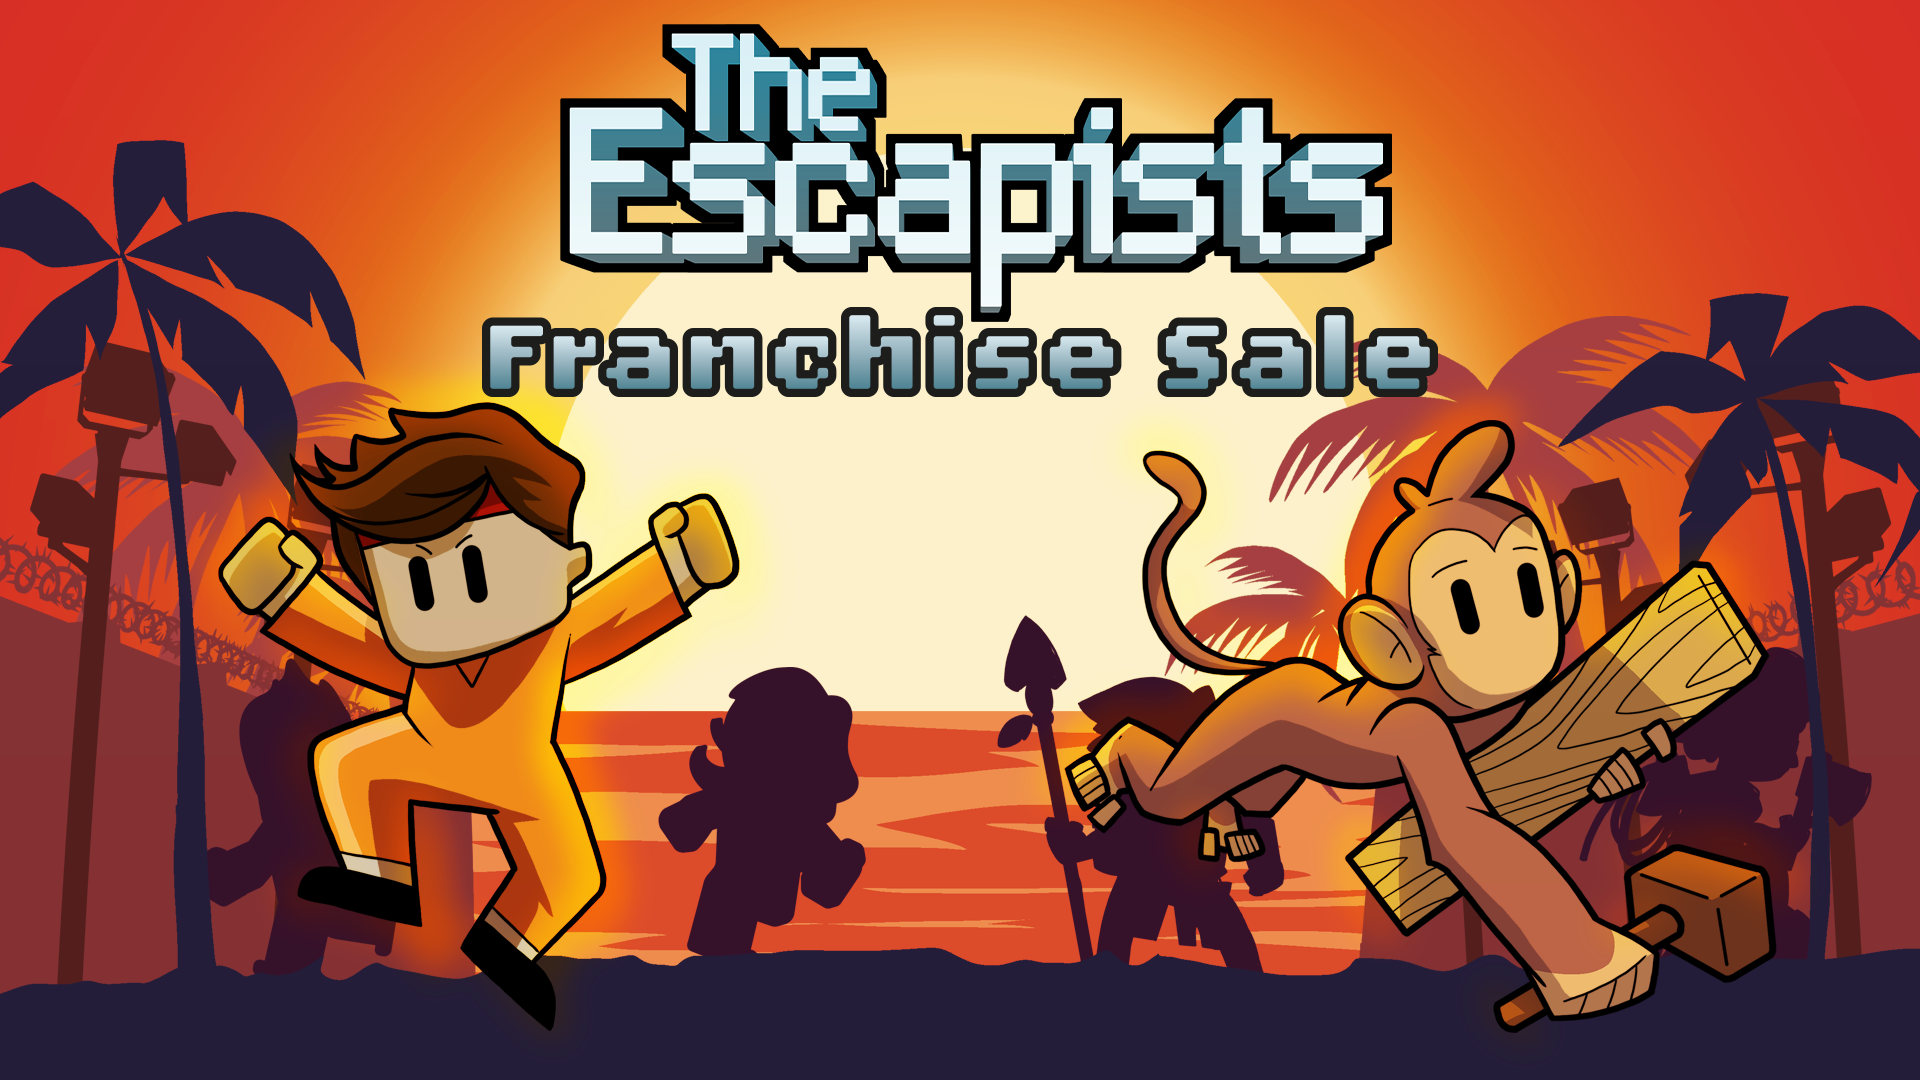 Save 75% on The Escapists 2 on Steam